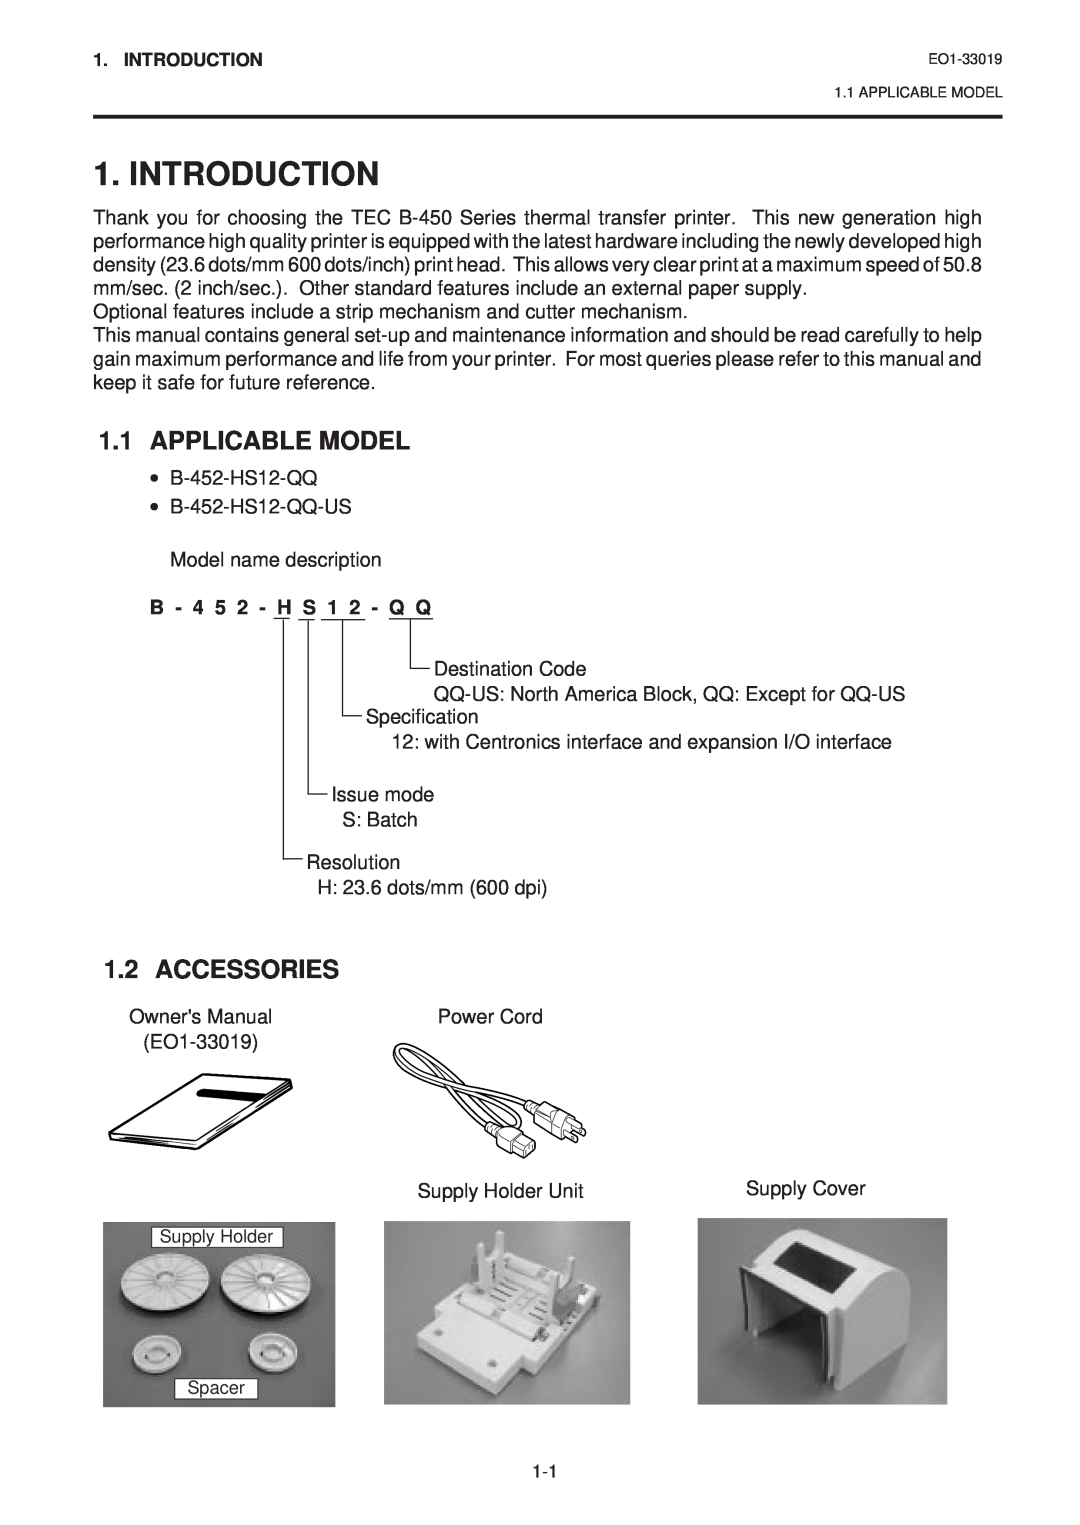 Toshiba B-450-HS-QQ owner manual Introduction, Applicable Model, Accessories, B - 4 5 2 - H S 1 2 - Q Q 